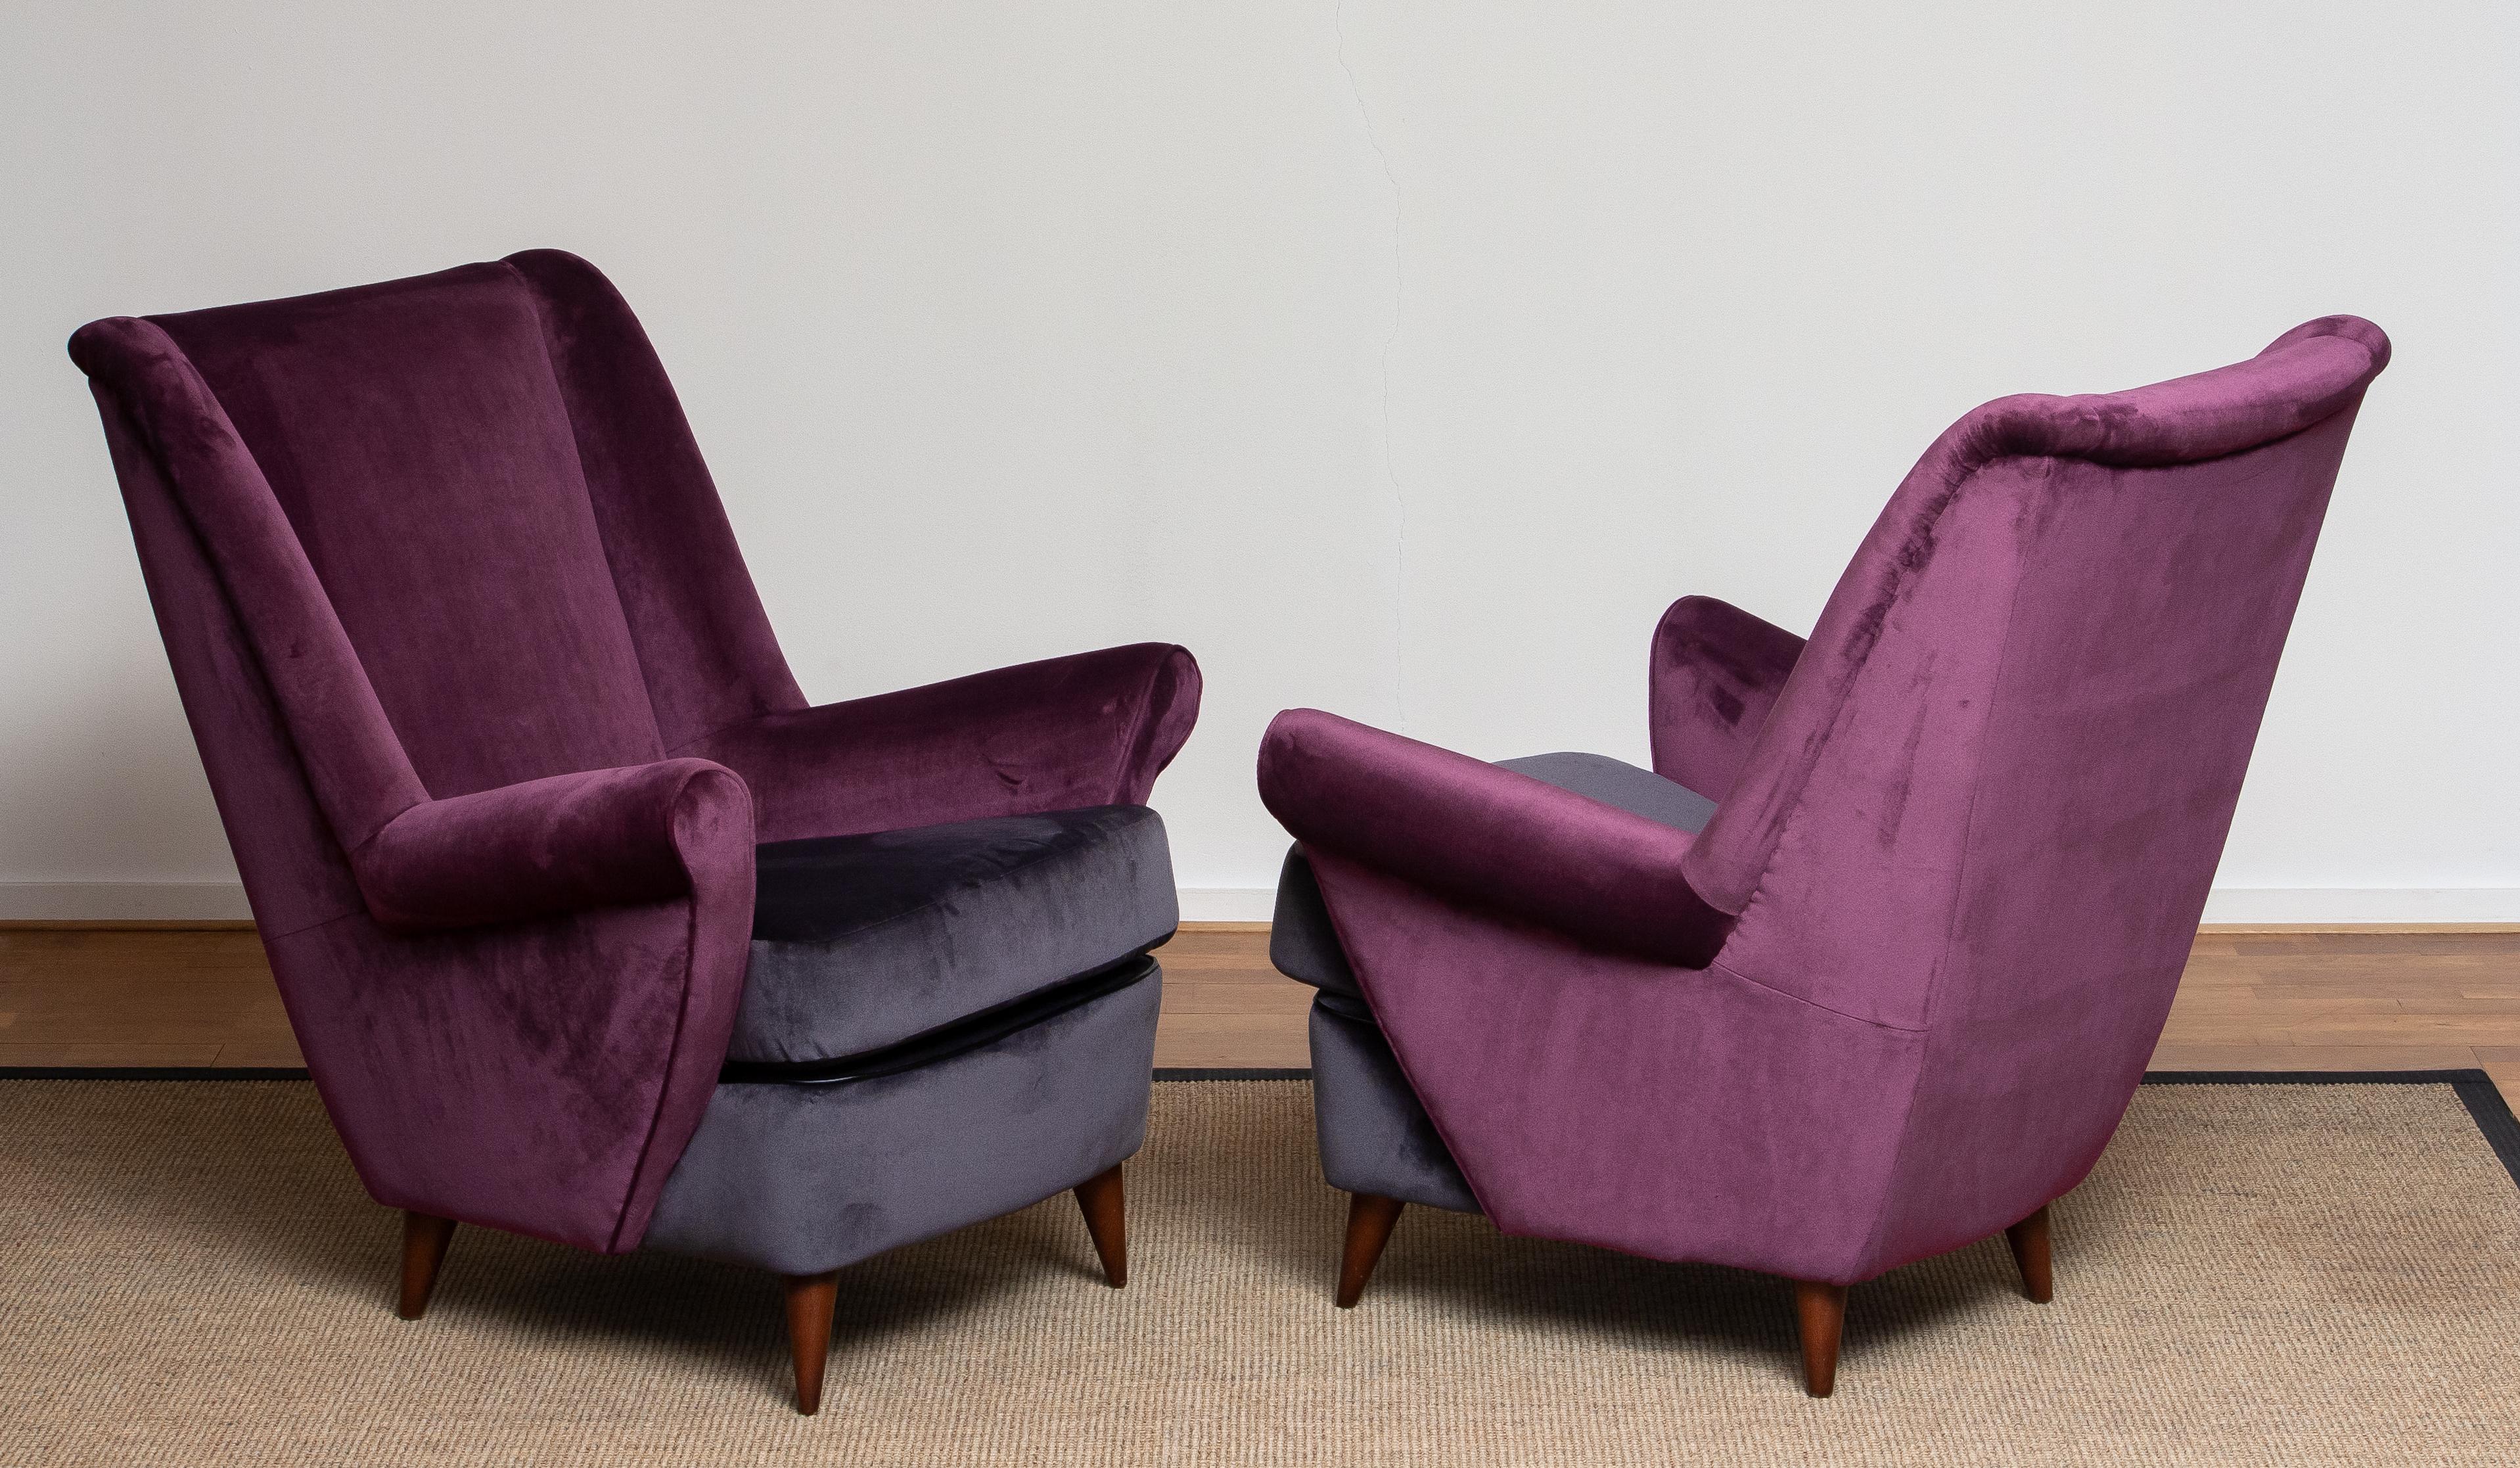 1950s Pair of Lounge / Easy Chairs Designed Gio Ponti Made by ISA Bergamo, Italy 1